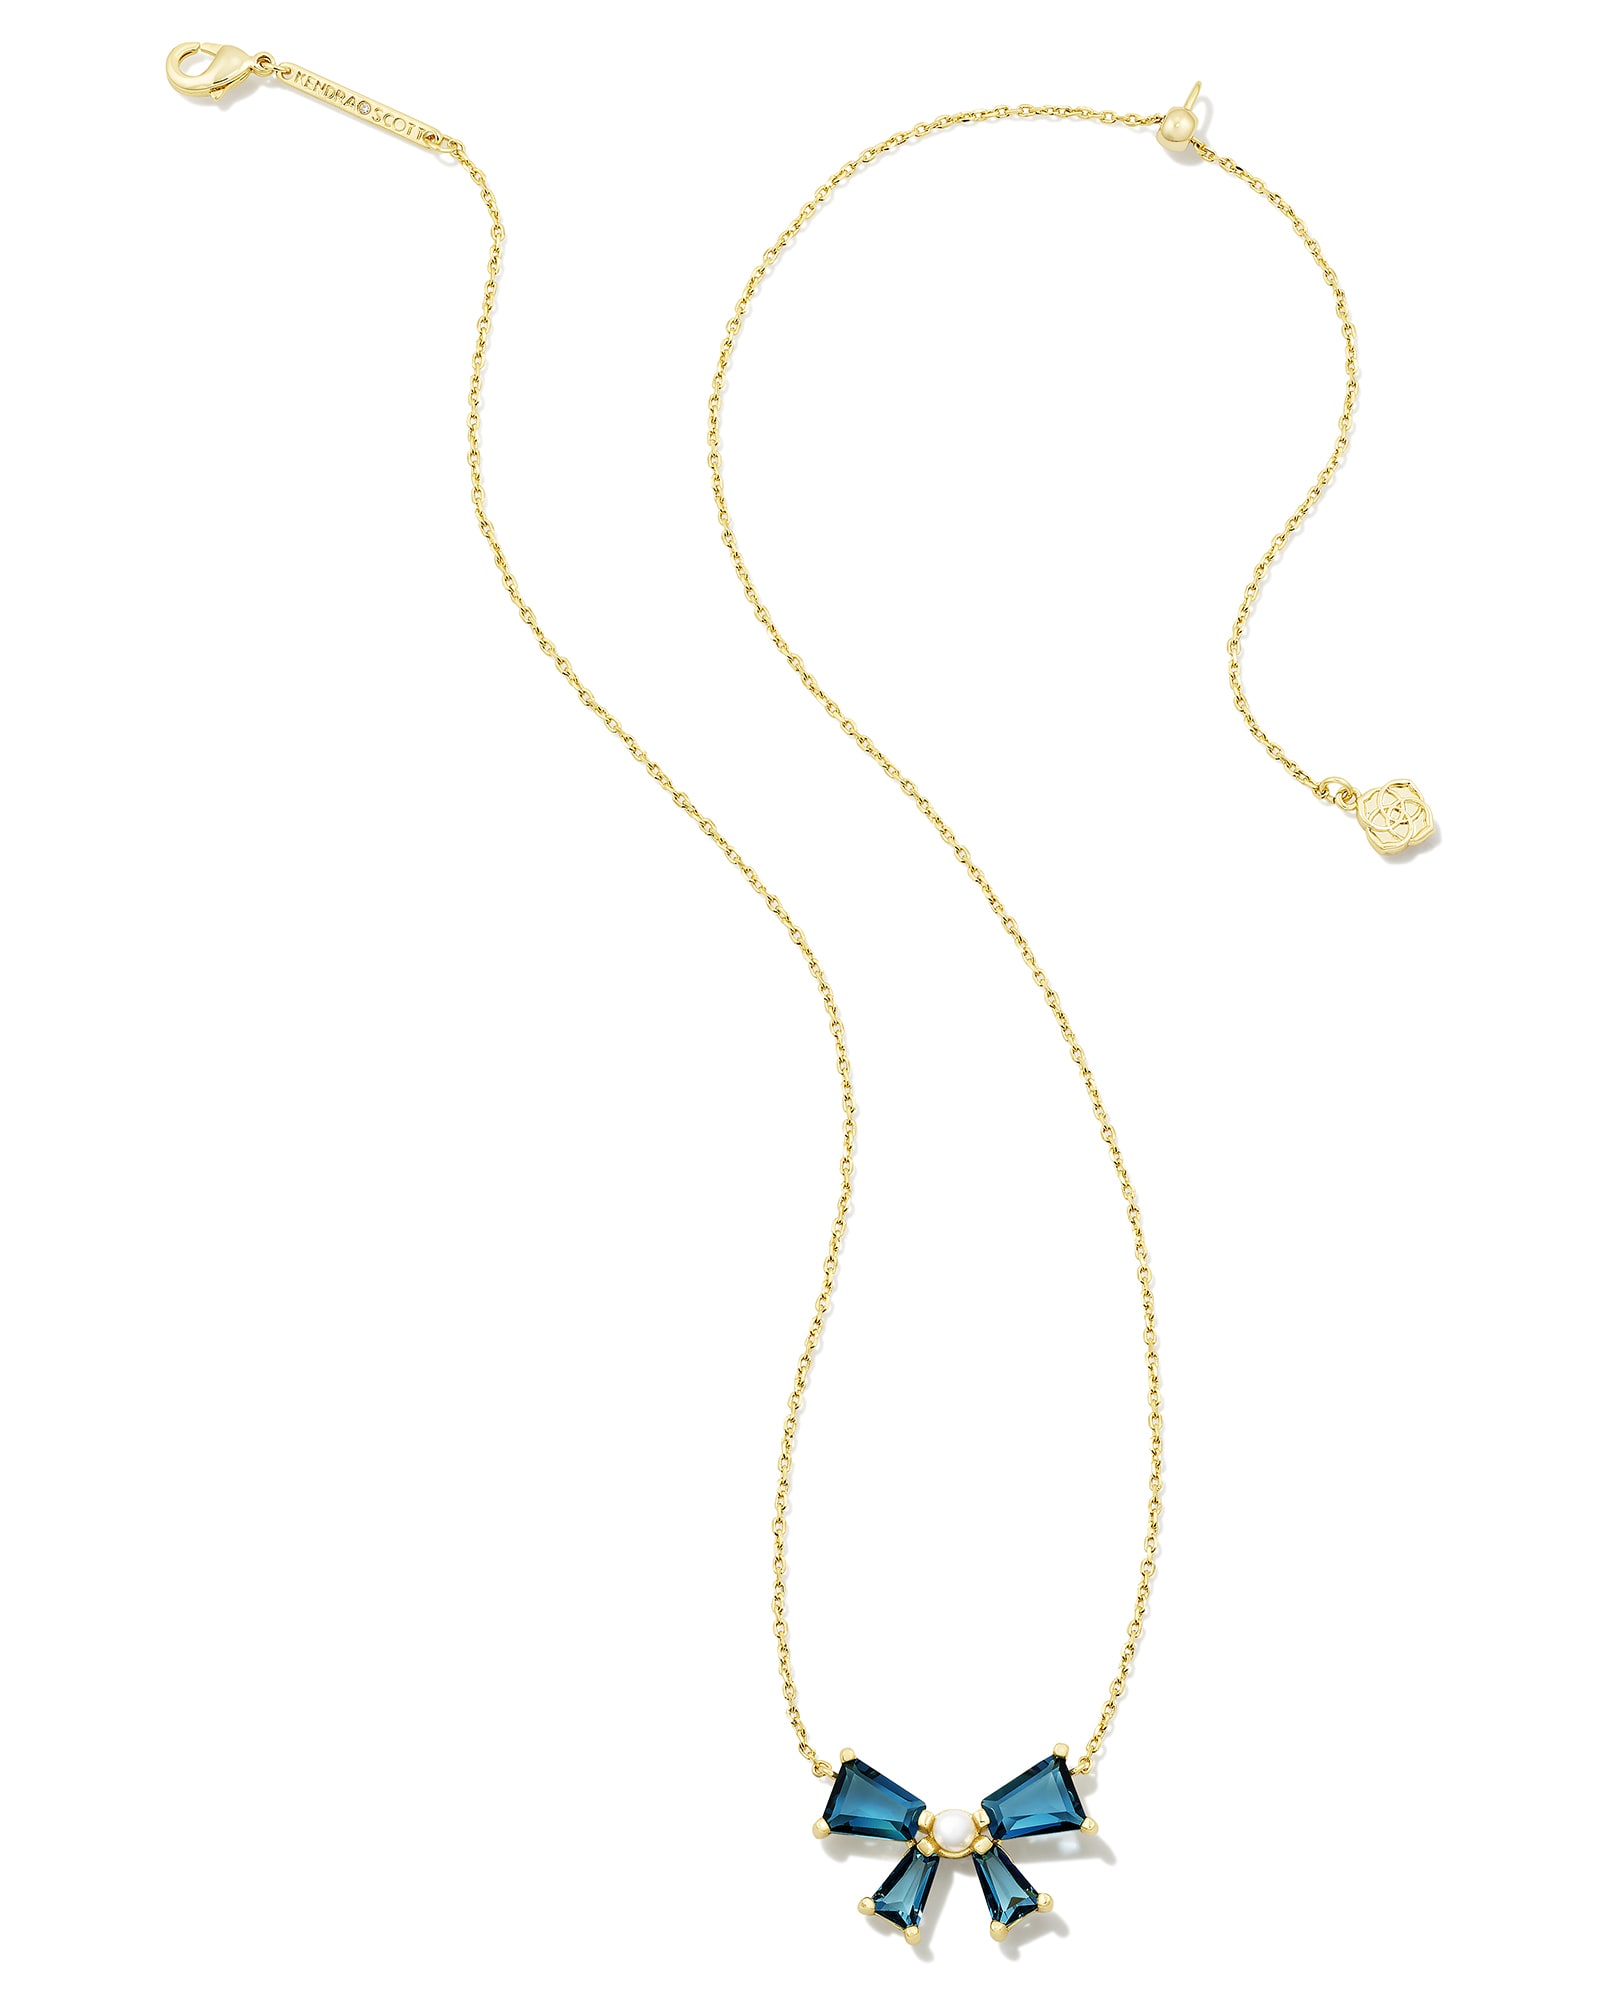 Blair Gold Bow Short Pendant Necklace in Teal Mix